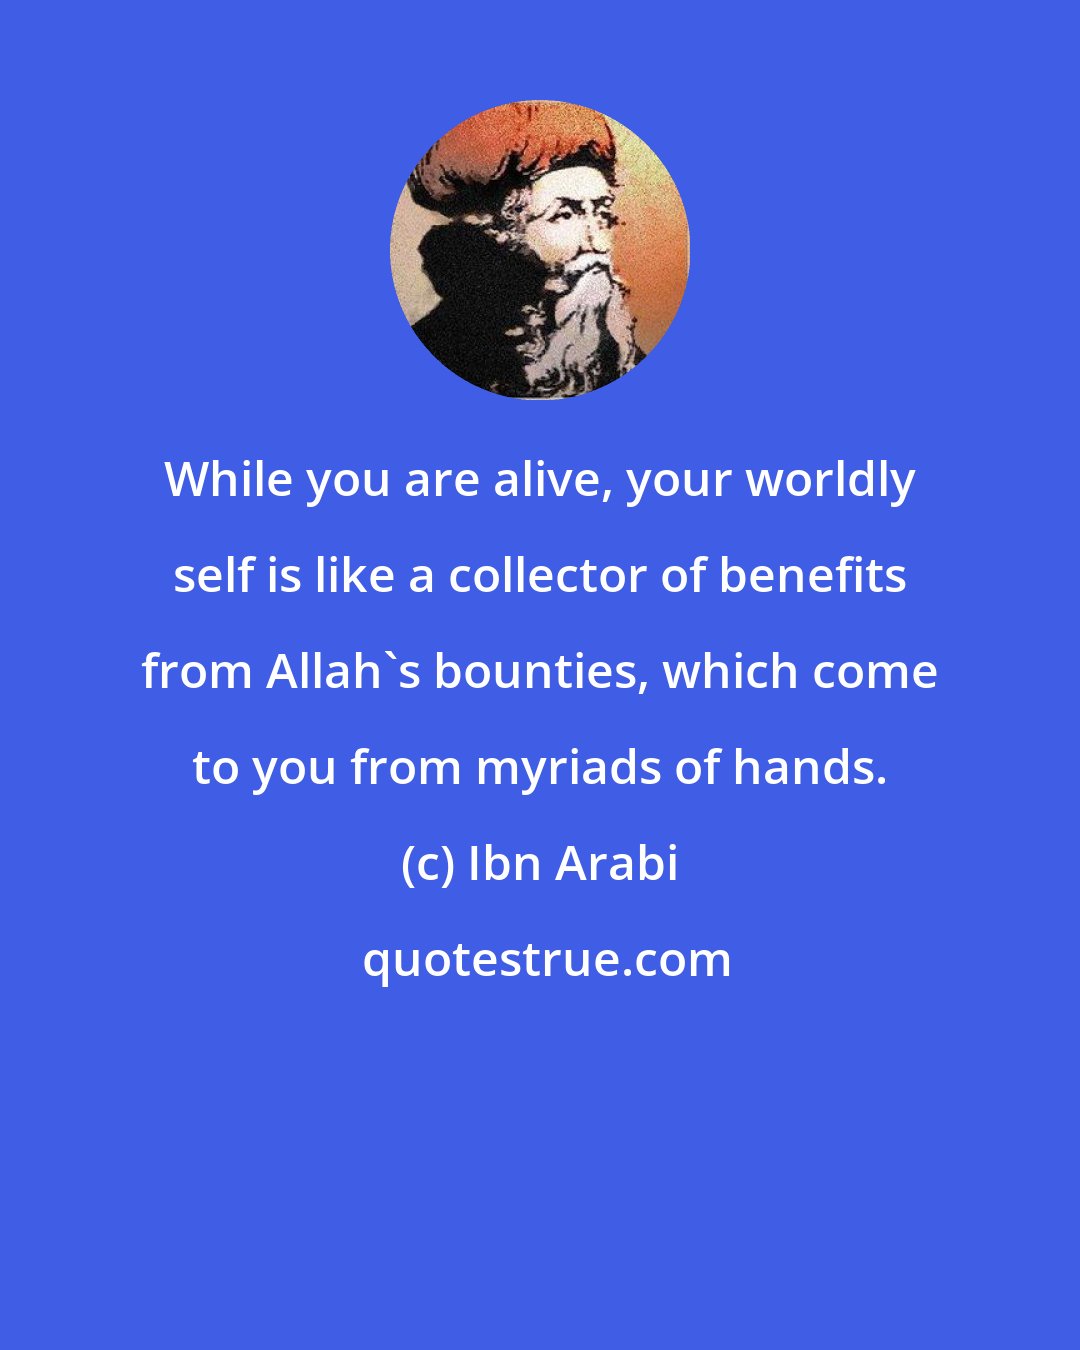 Ibn Arabi: While you are alive, your worldly self is like a collector of benefits from Allah's bounties, which come to you from myriads of hands.